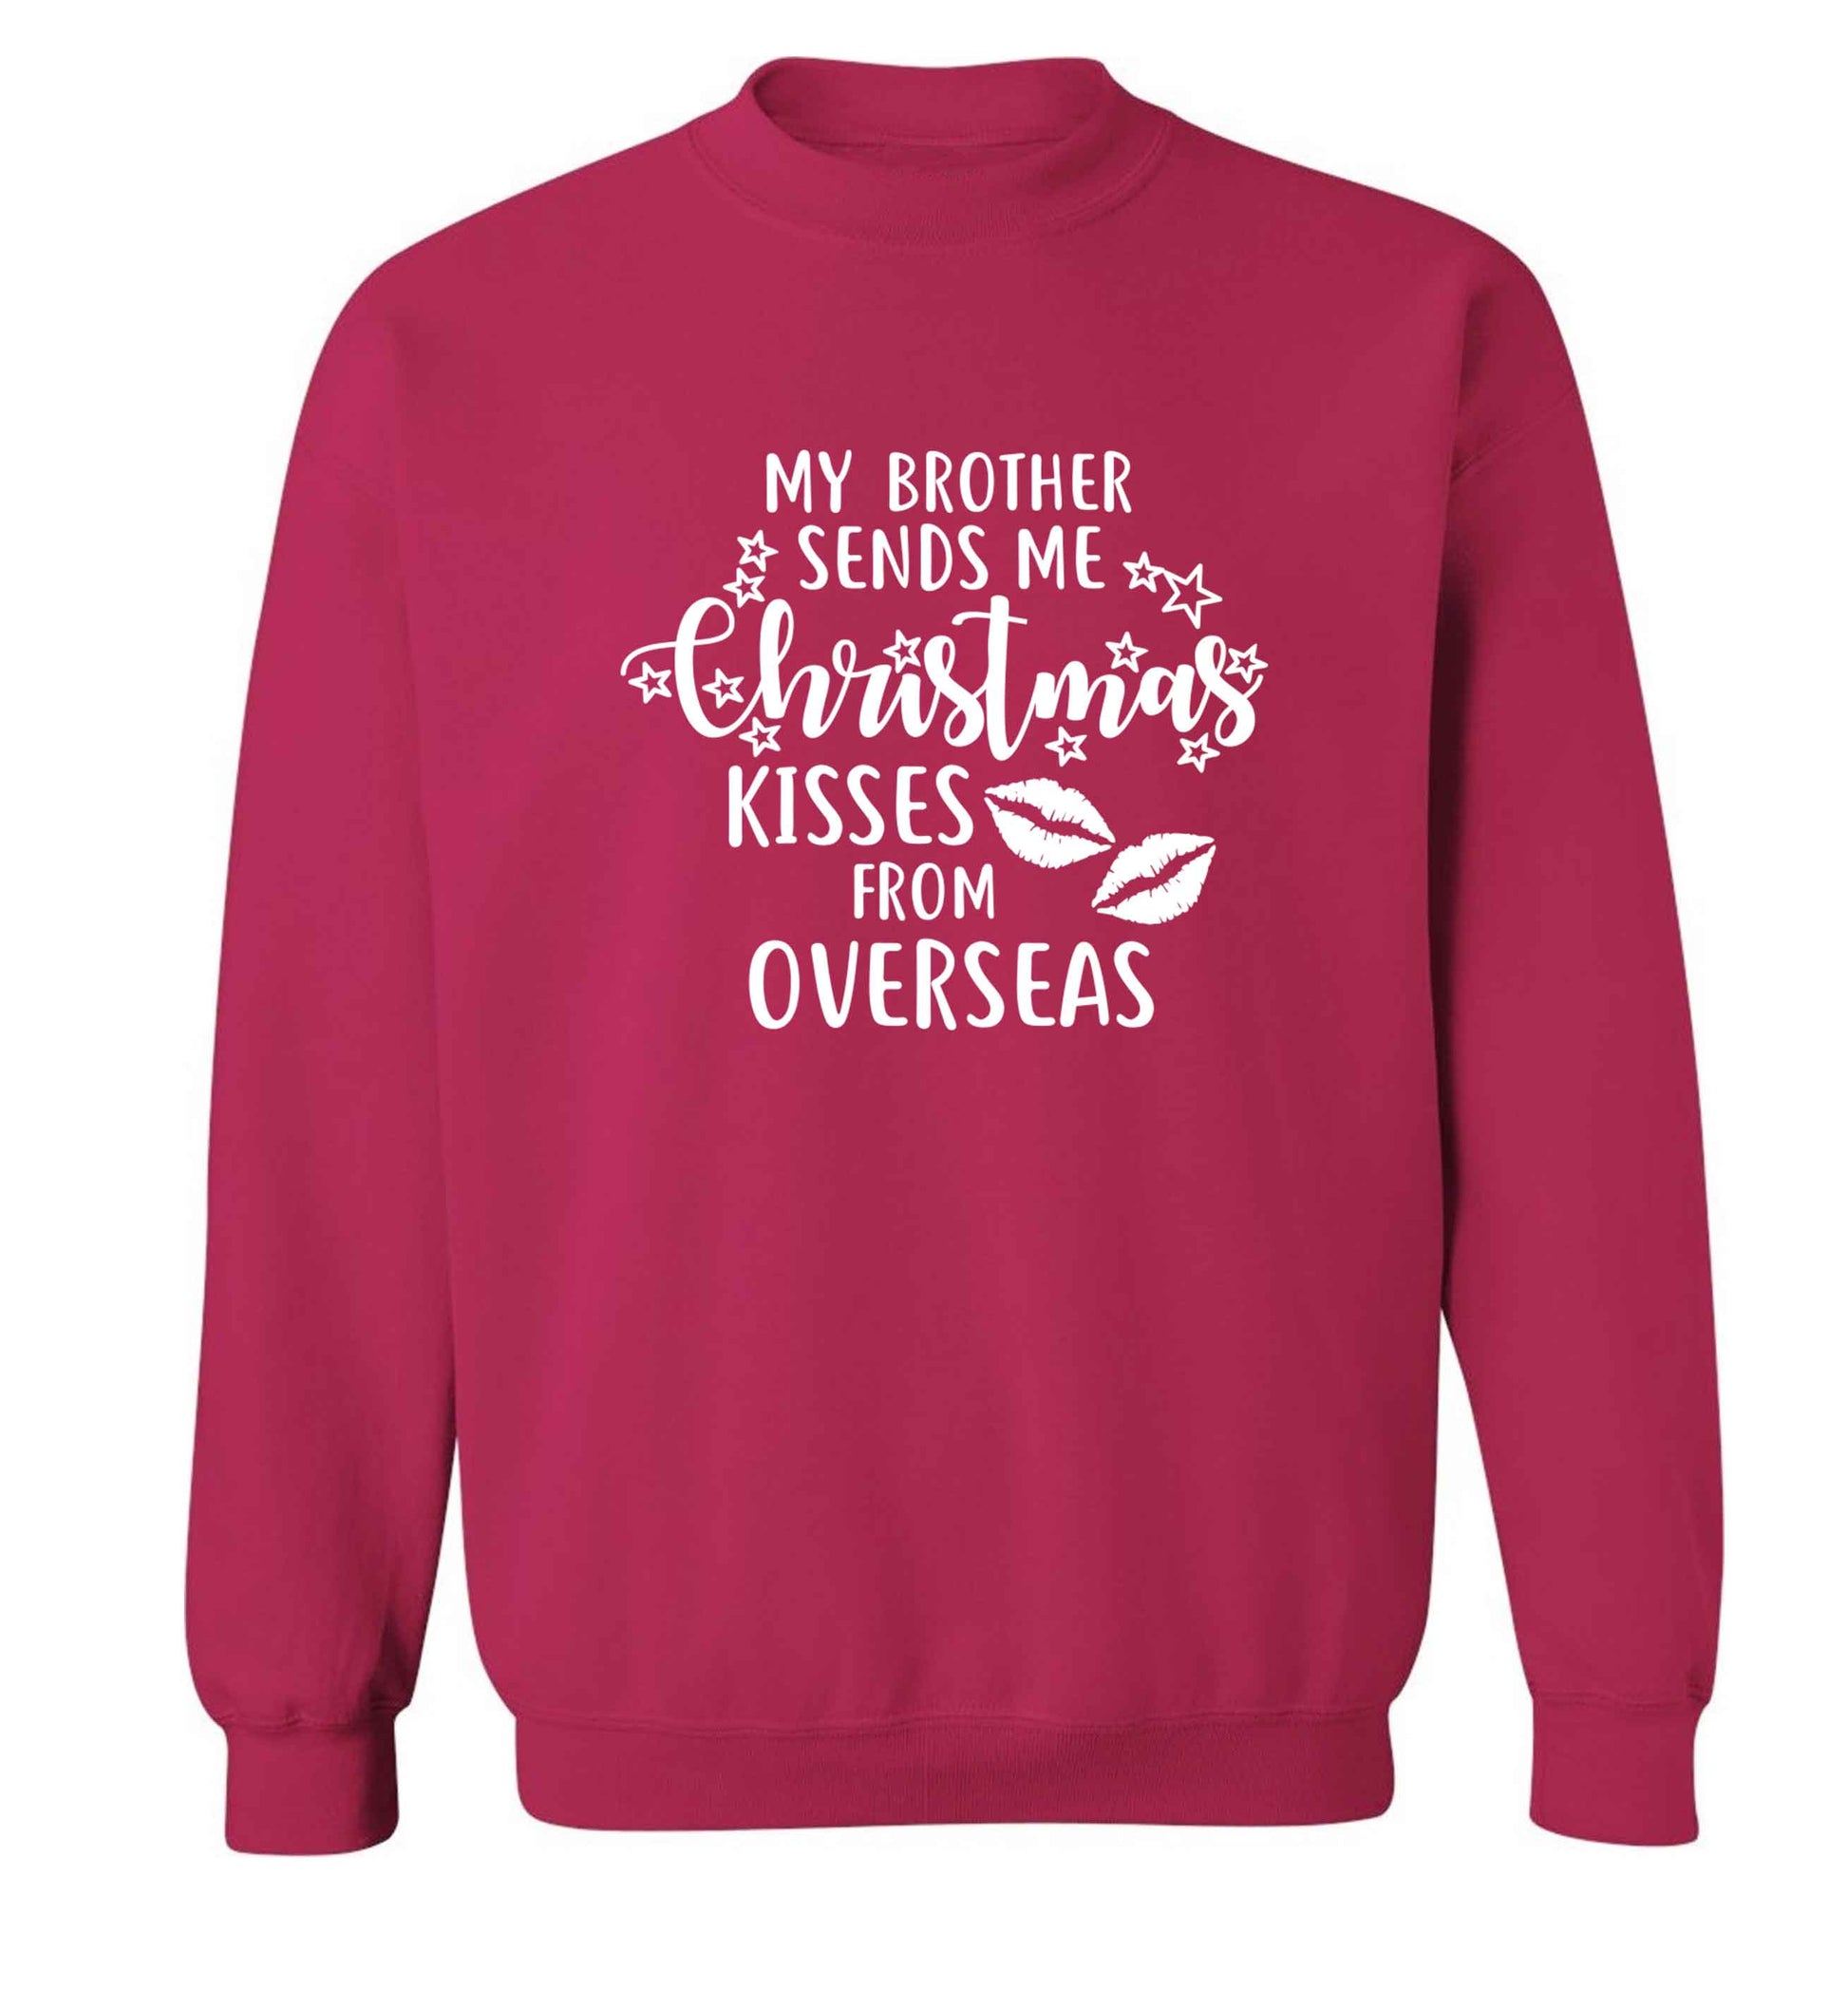 Brother Christmas Kisses Overseas adult's unisex pink sweater 2XL